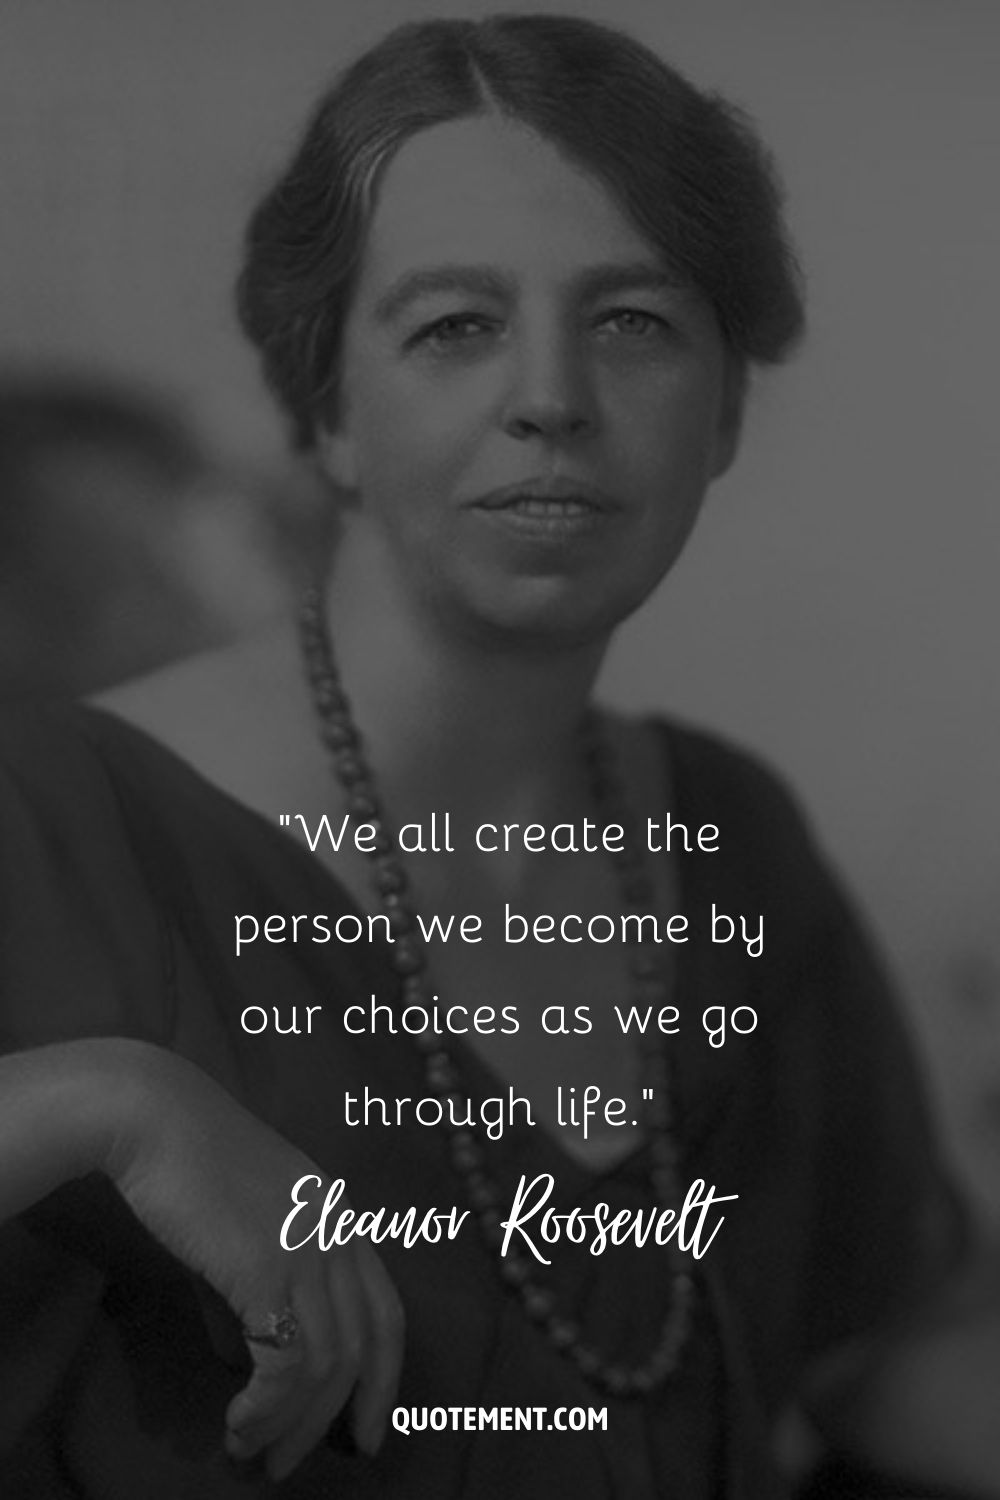 We all create the person we become by our choices as we go through life.